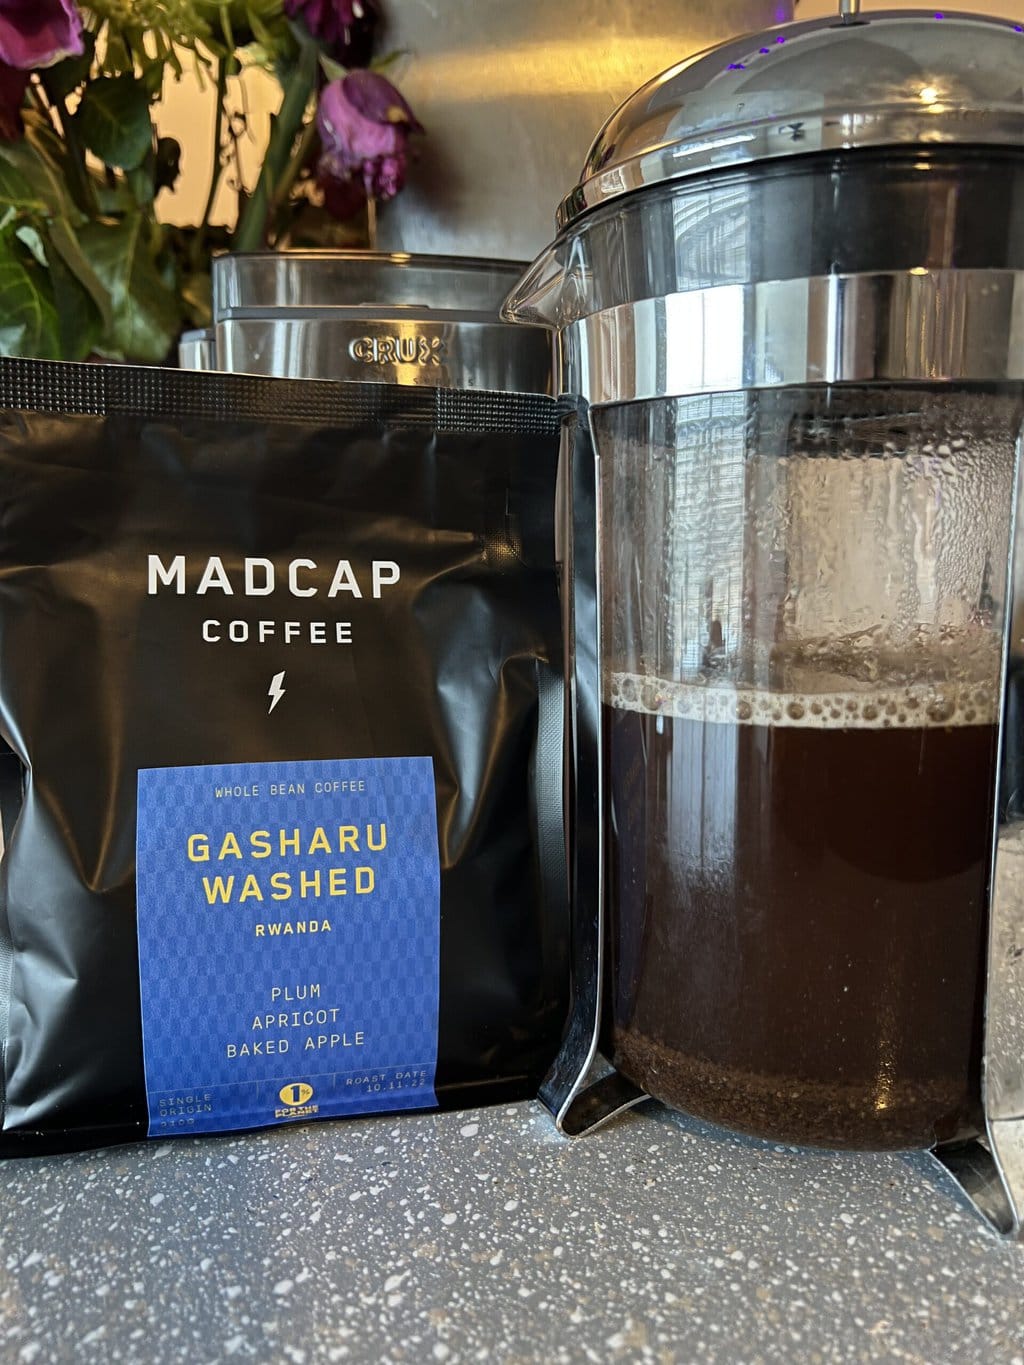 Gasharu Washed - Madcap coffee packaging and brewed coffee french press